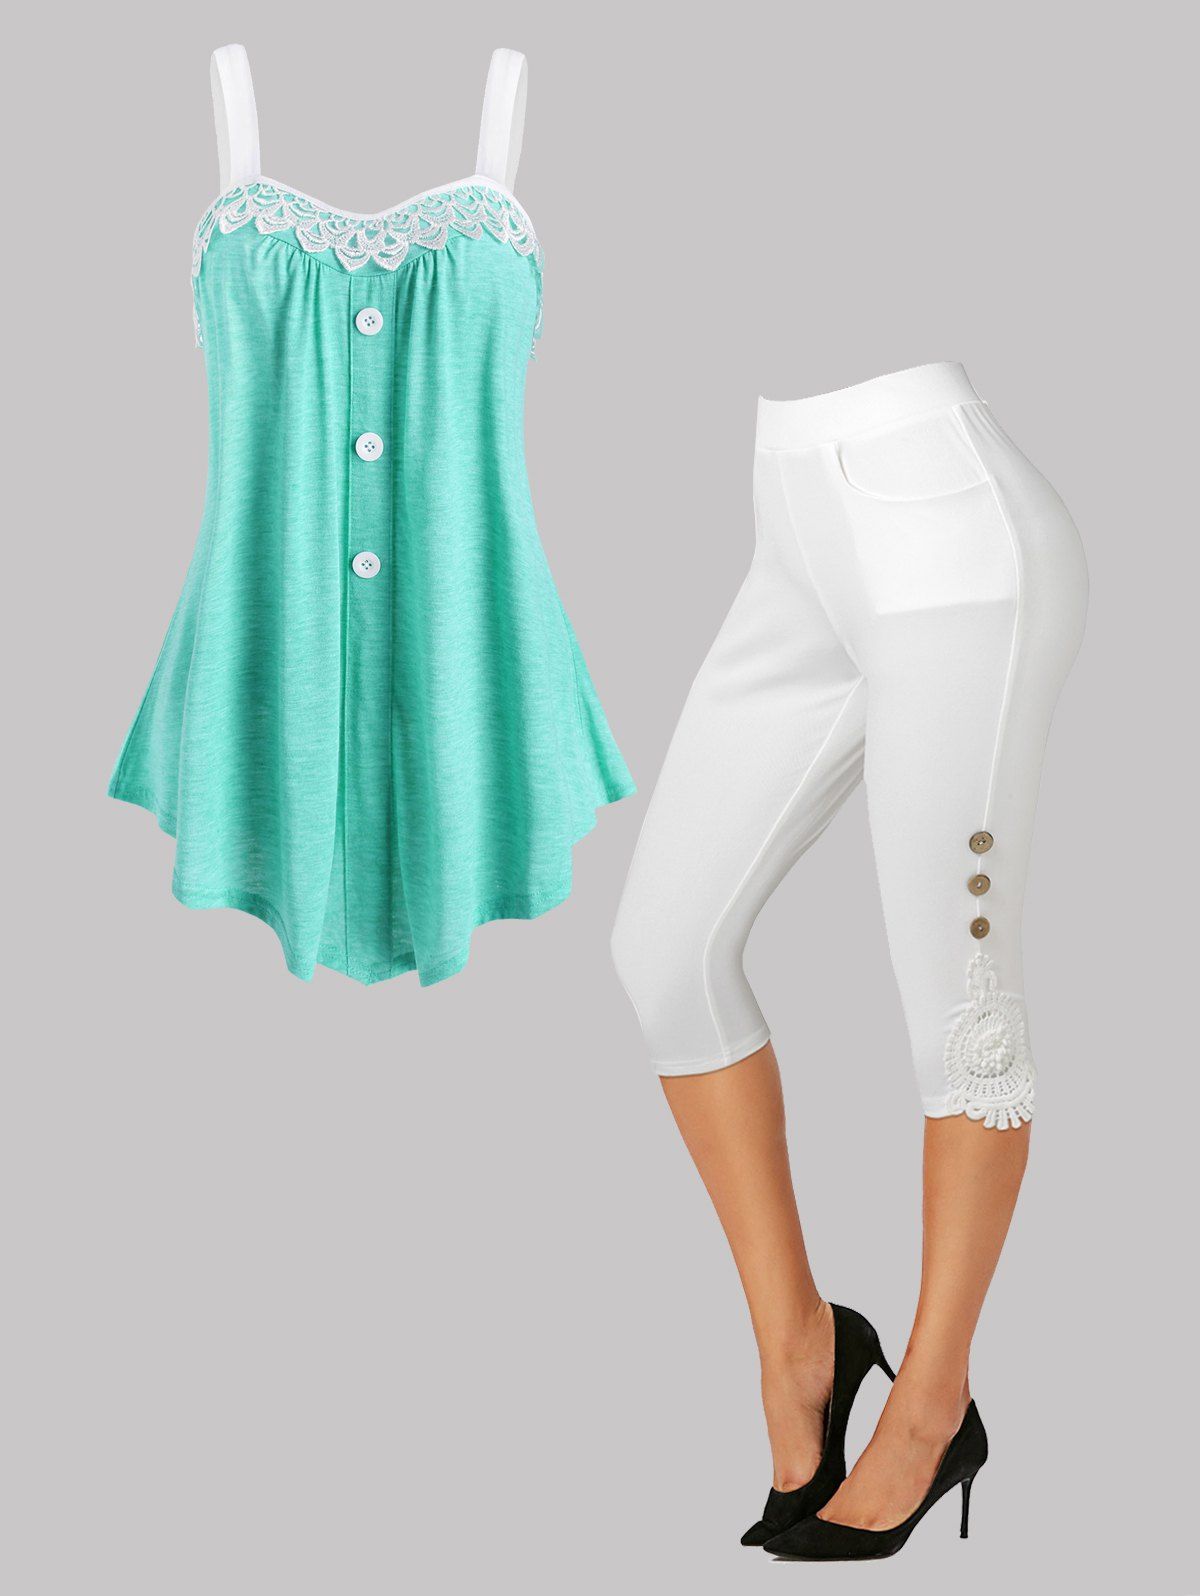 Lace Trim Cami Top and Capri Leggings Outfit - LIGHT GREEN M